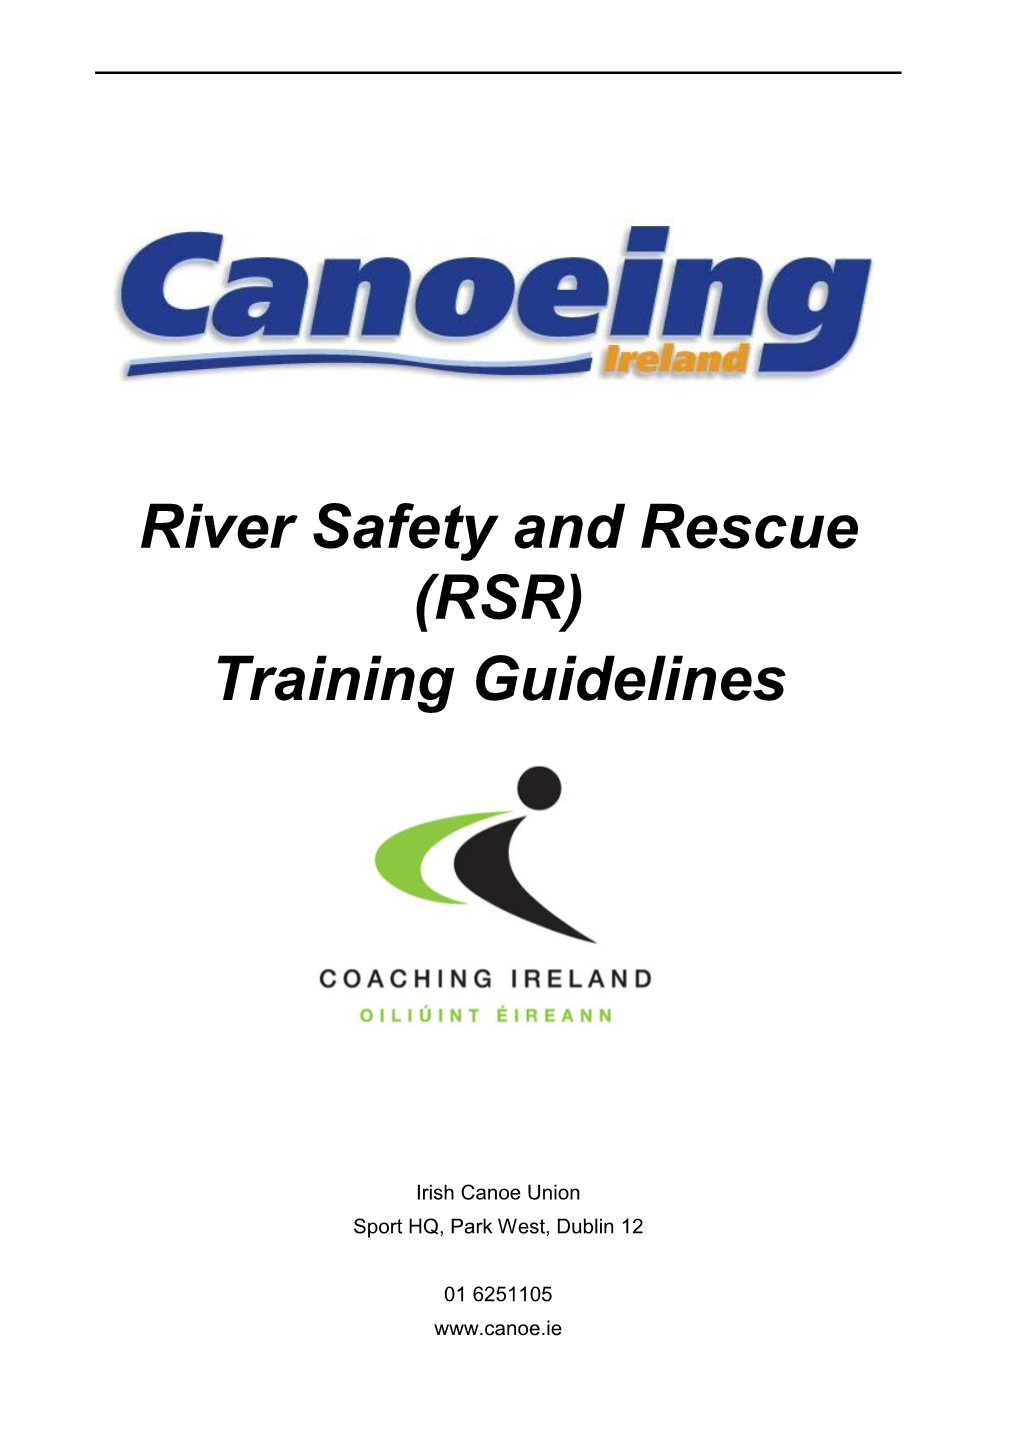 River Safety and Rescue (RSR) Training Guidelines